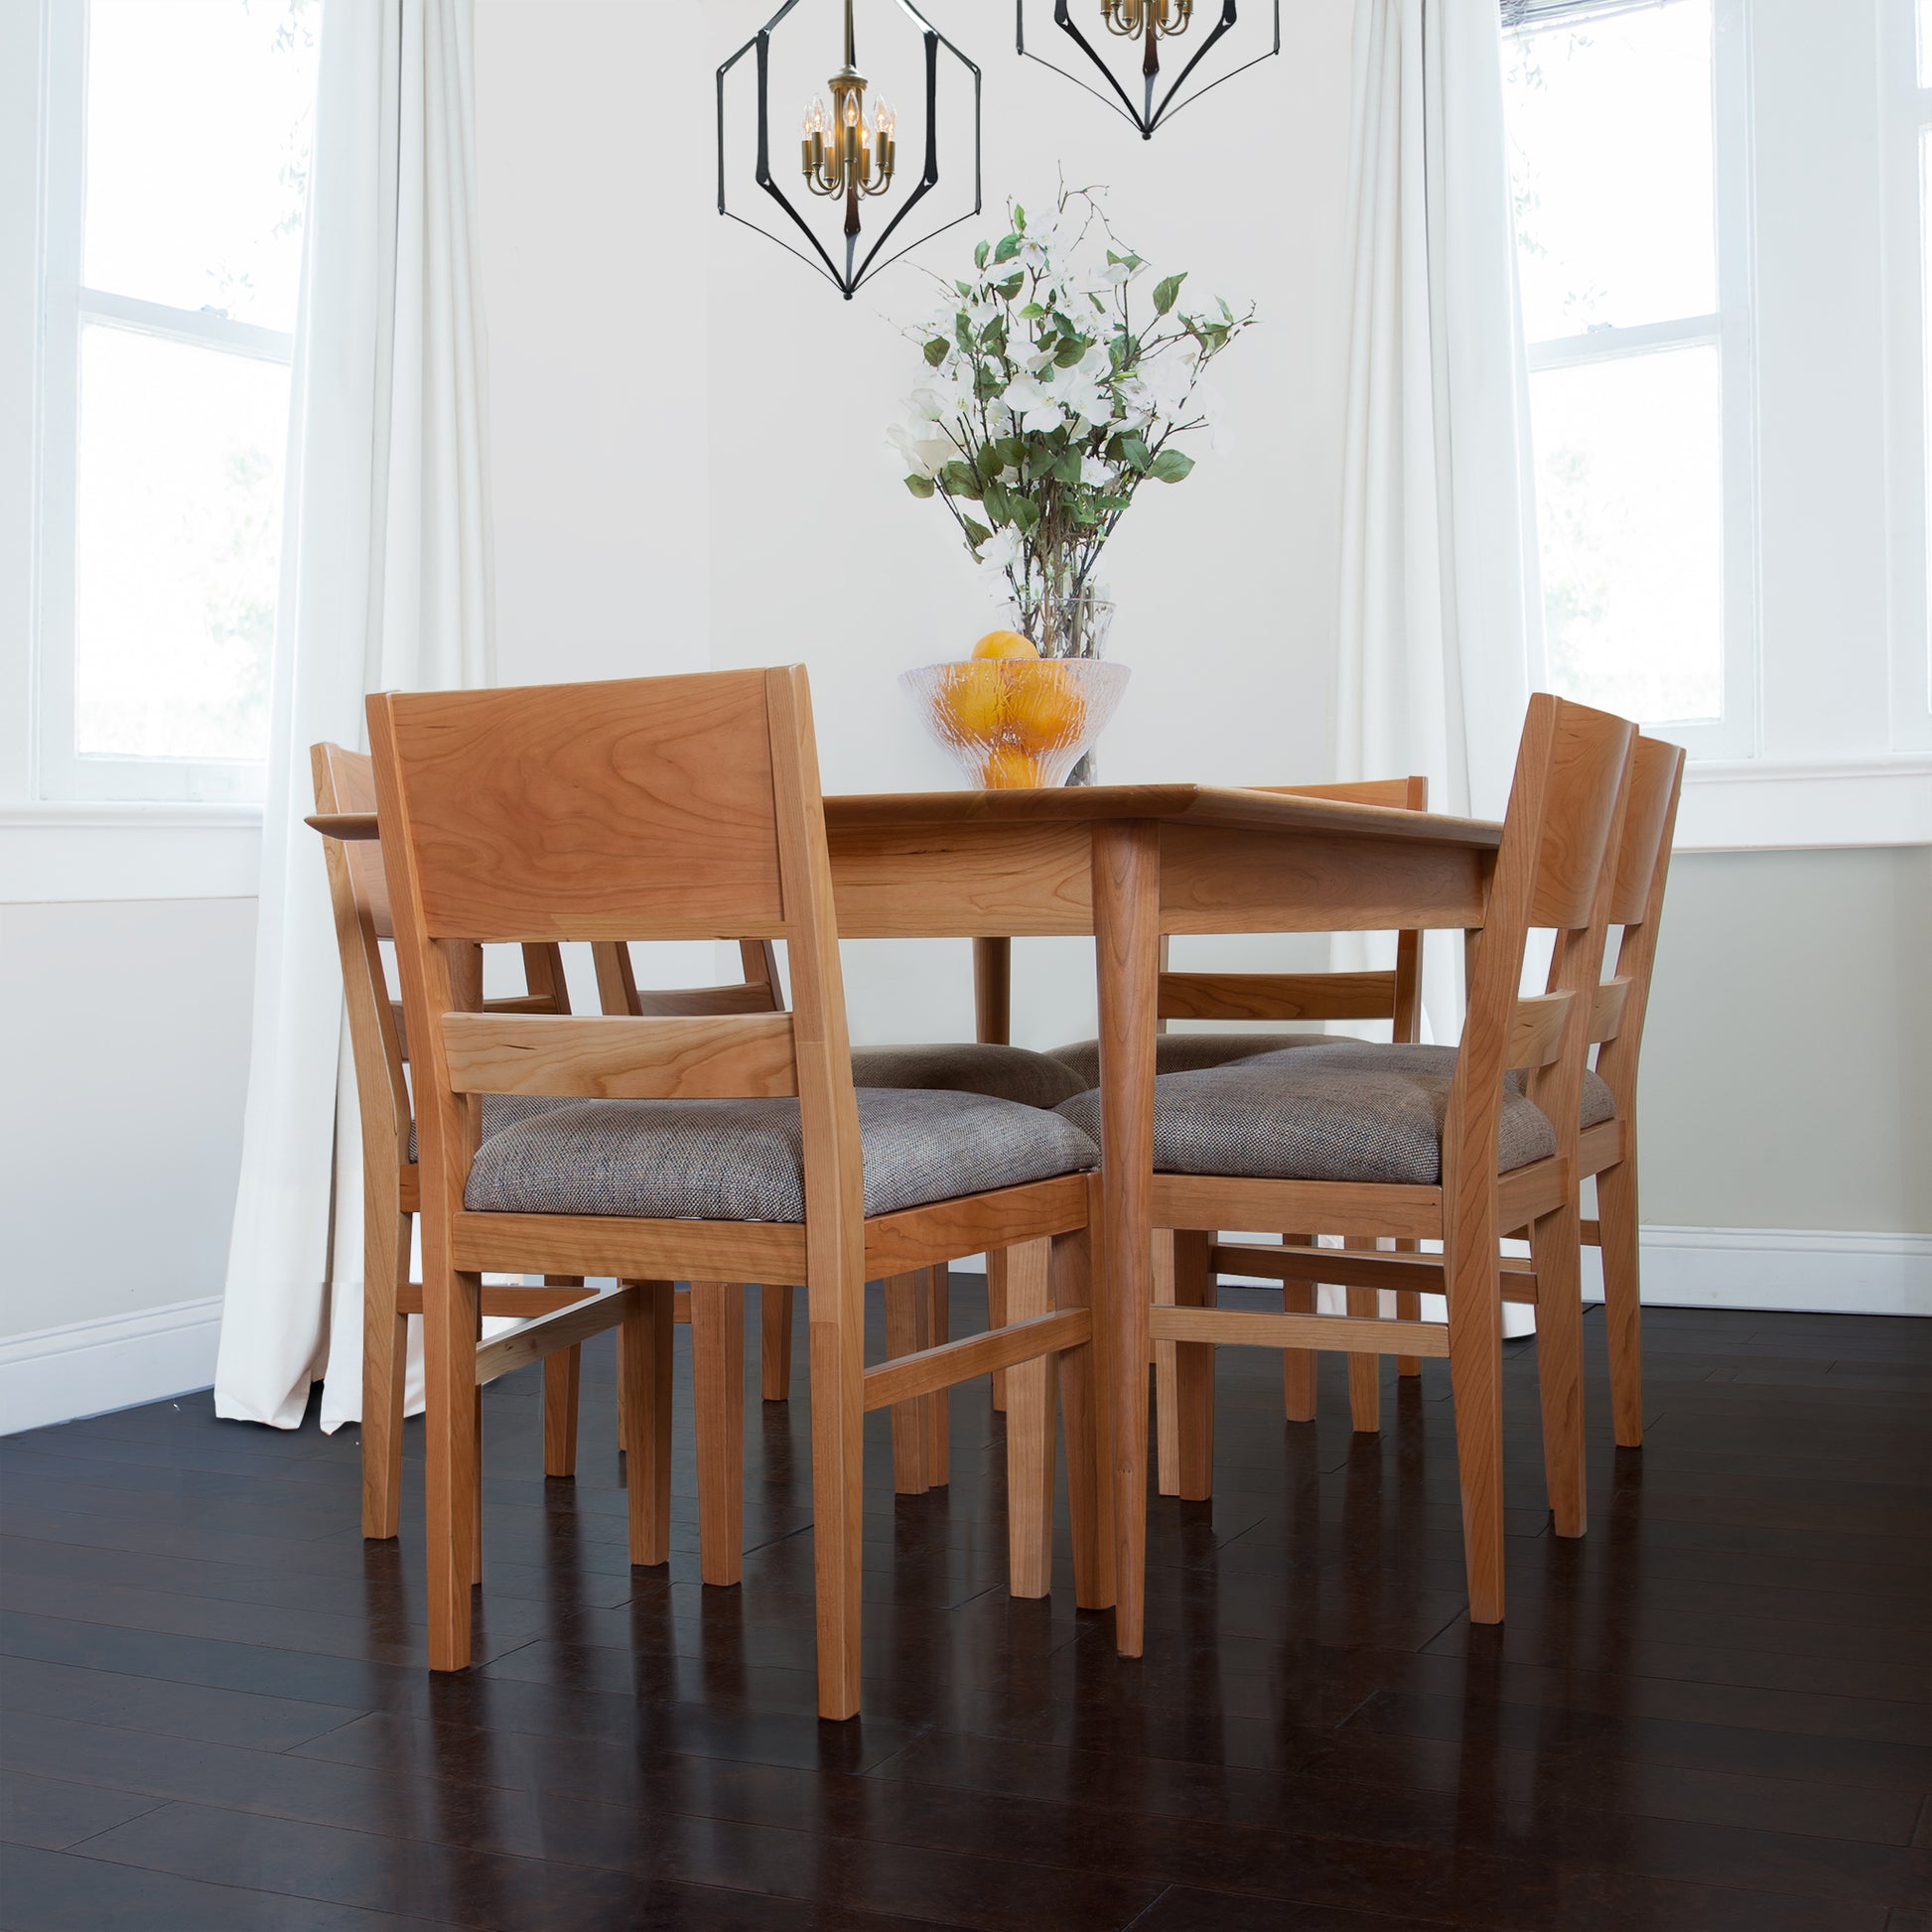 A wooden dining table with four Vermont Woods Studios Burke Modern Chairs set on a dark hardwood floor, with a simple centerpiece consisting of a glass vase with greenery and orange flowers.